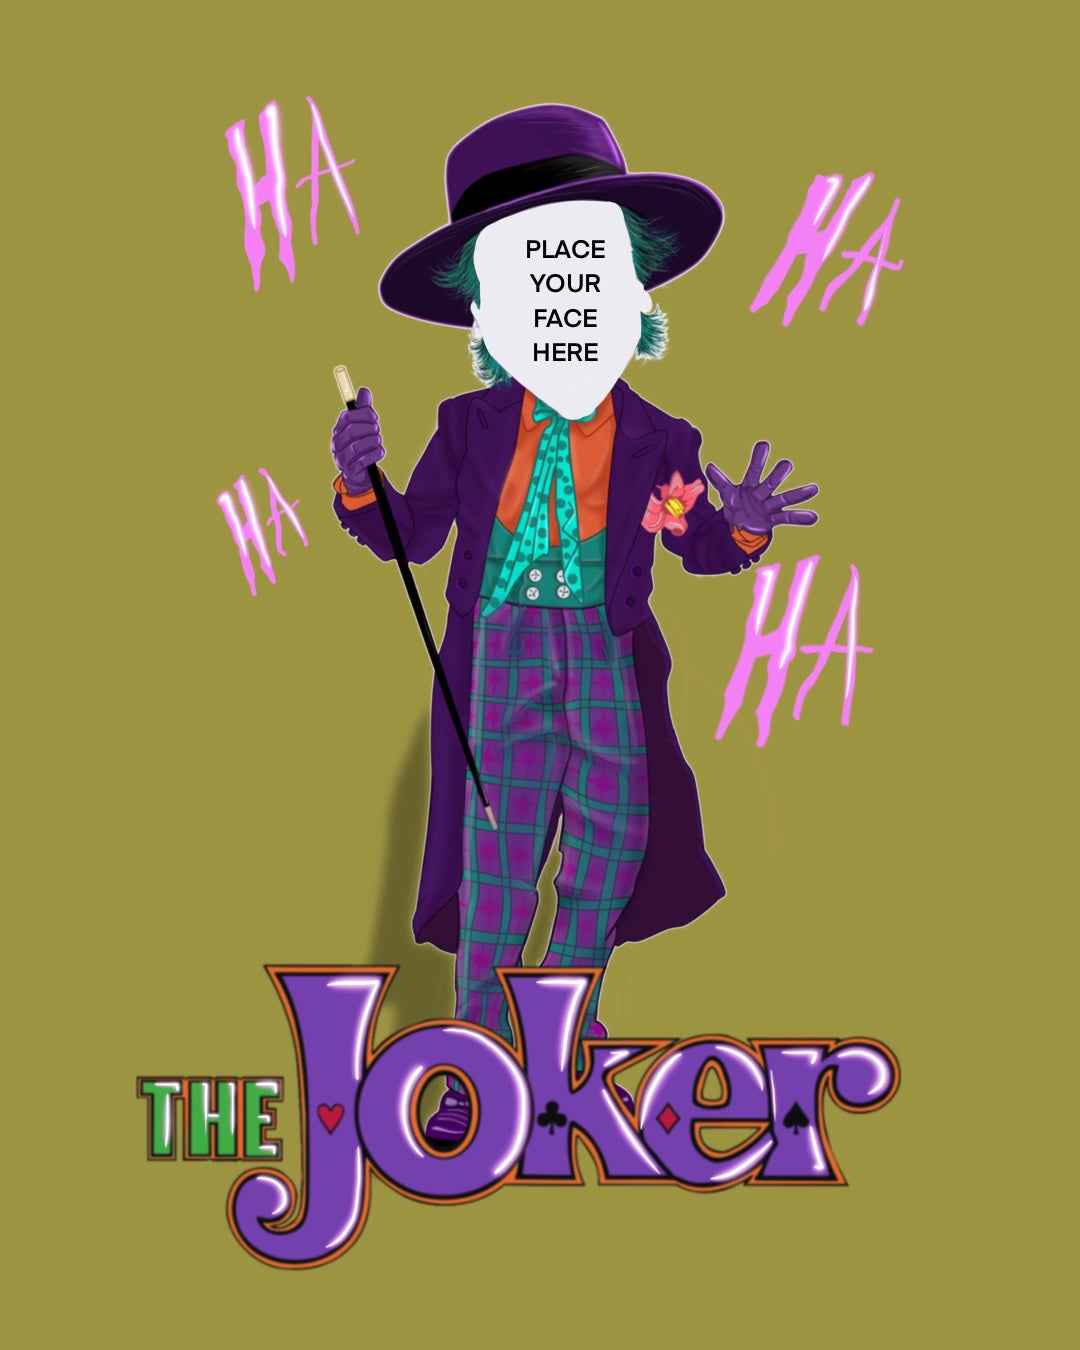 A4 #joker Prints-Prints add face and text for FREE